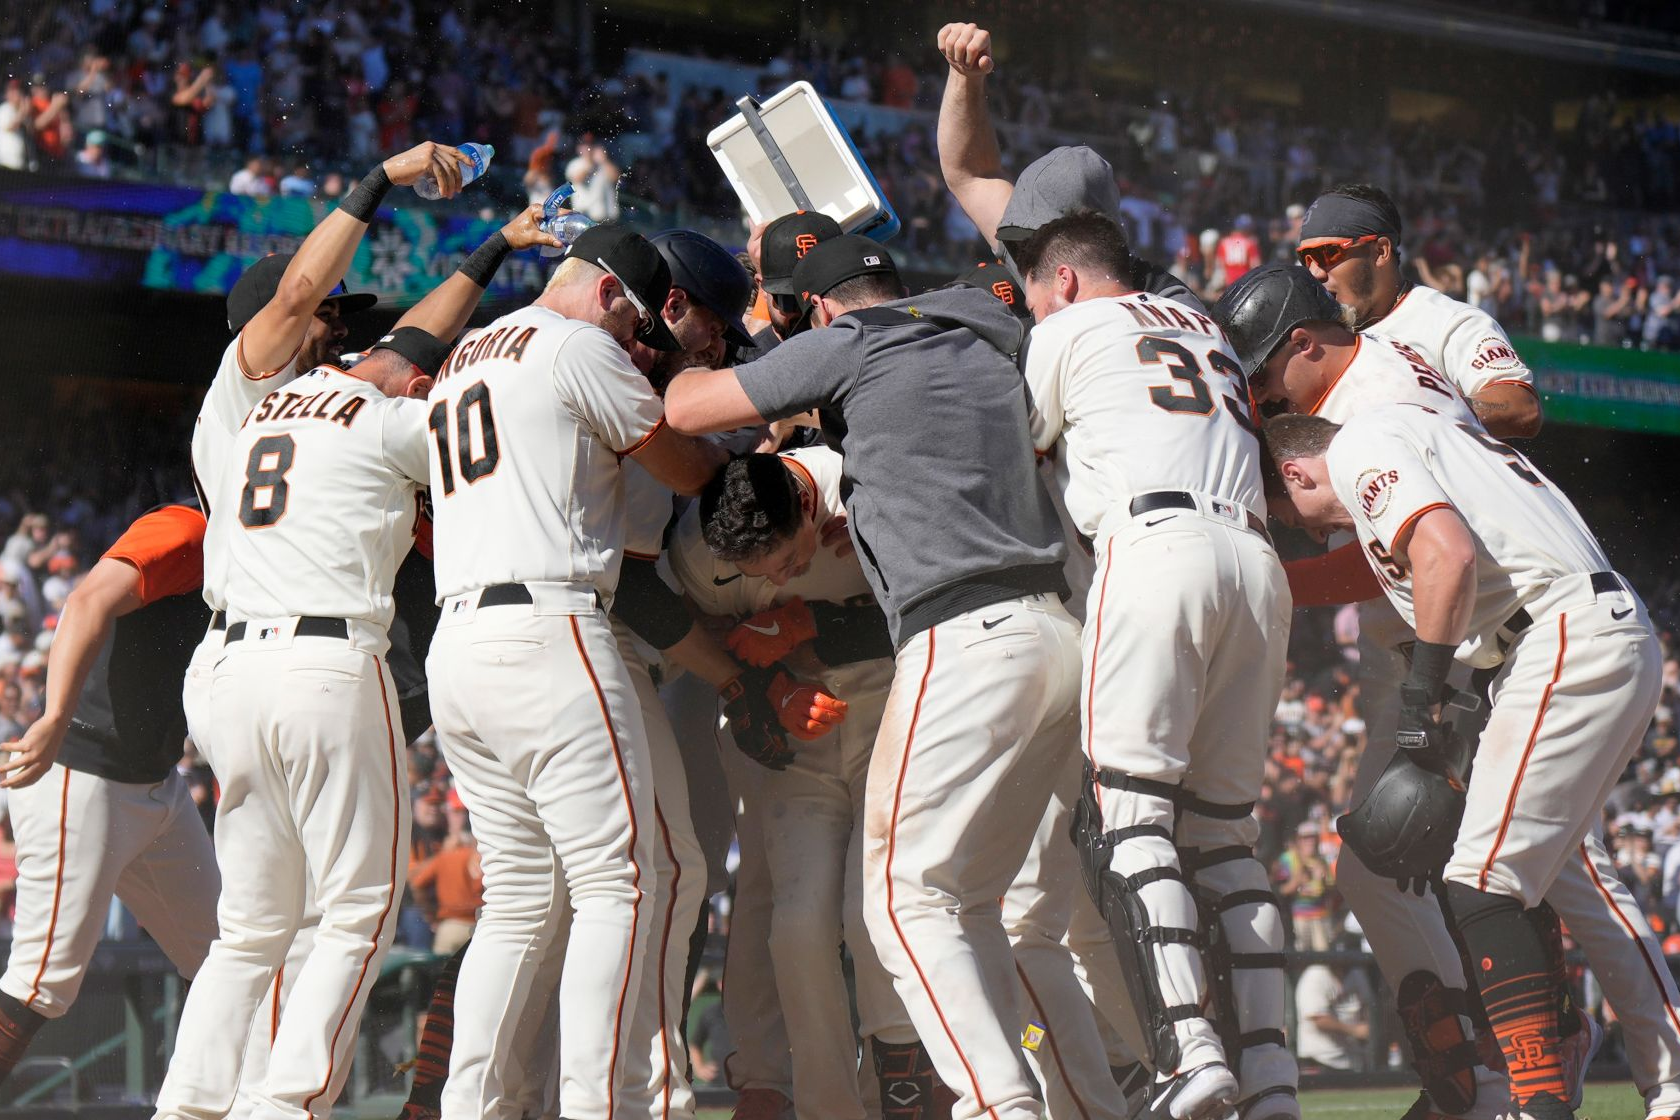 Here's how to get Giants tickets before Opening Day